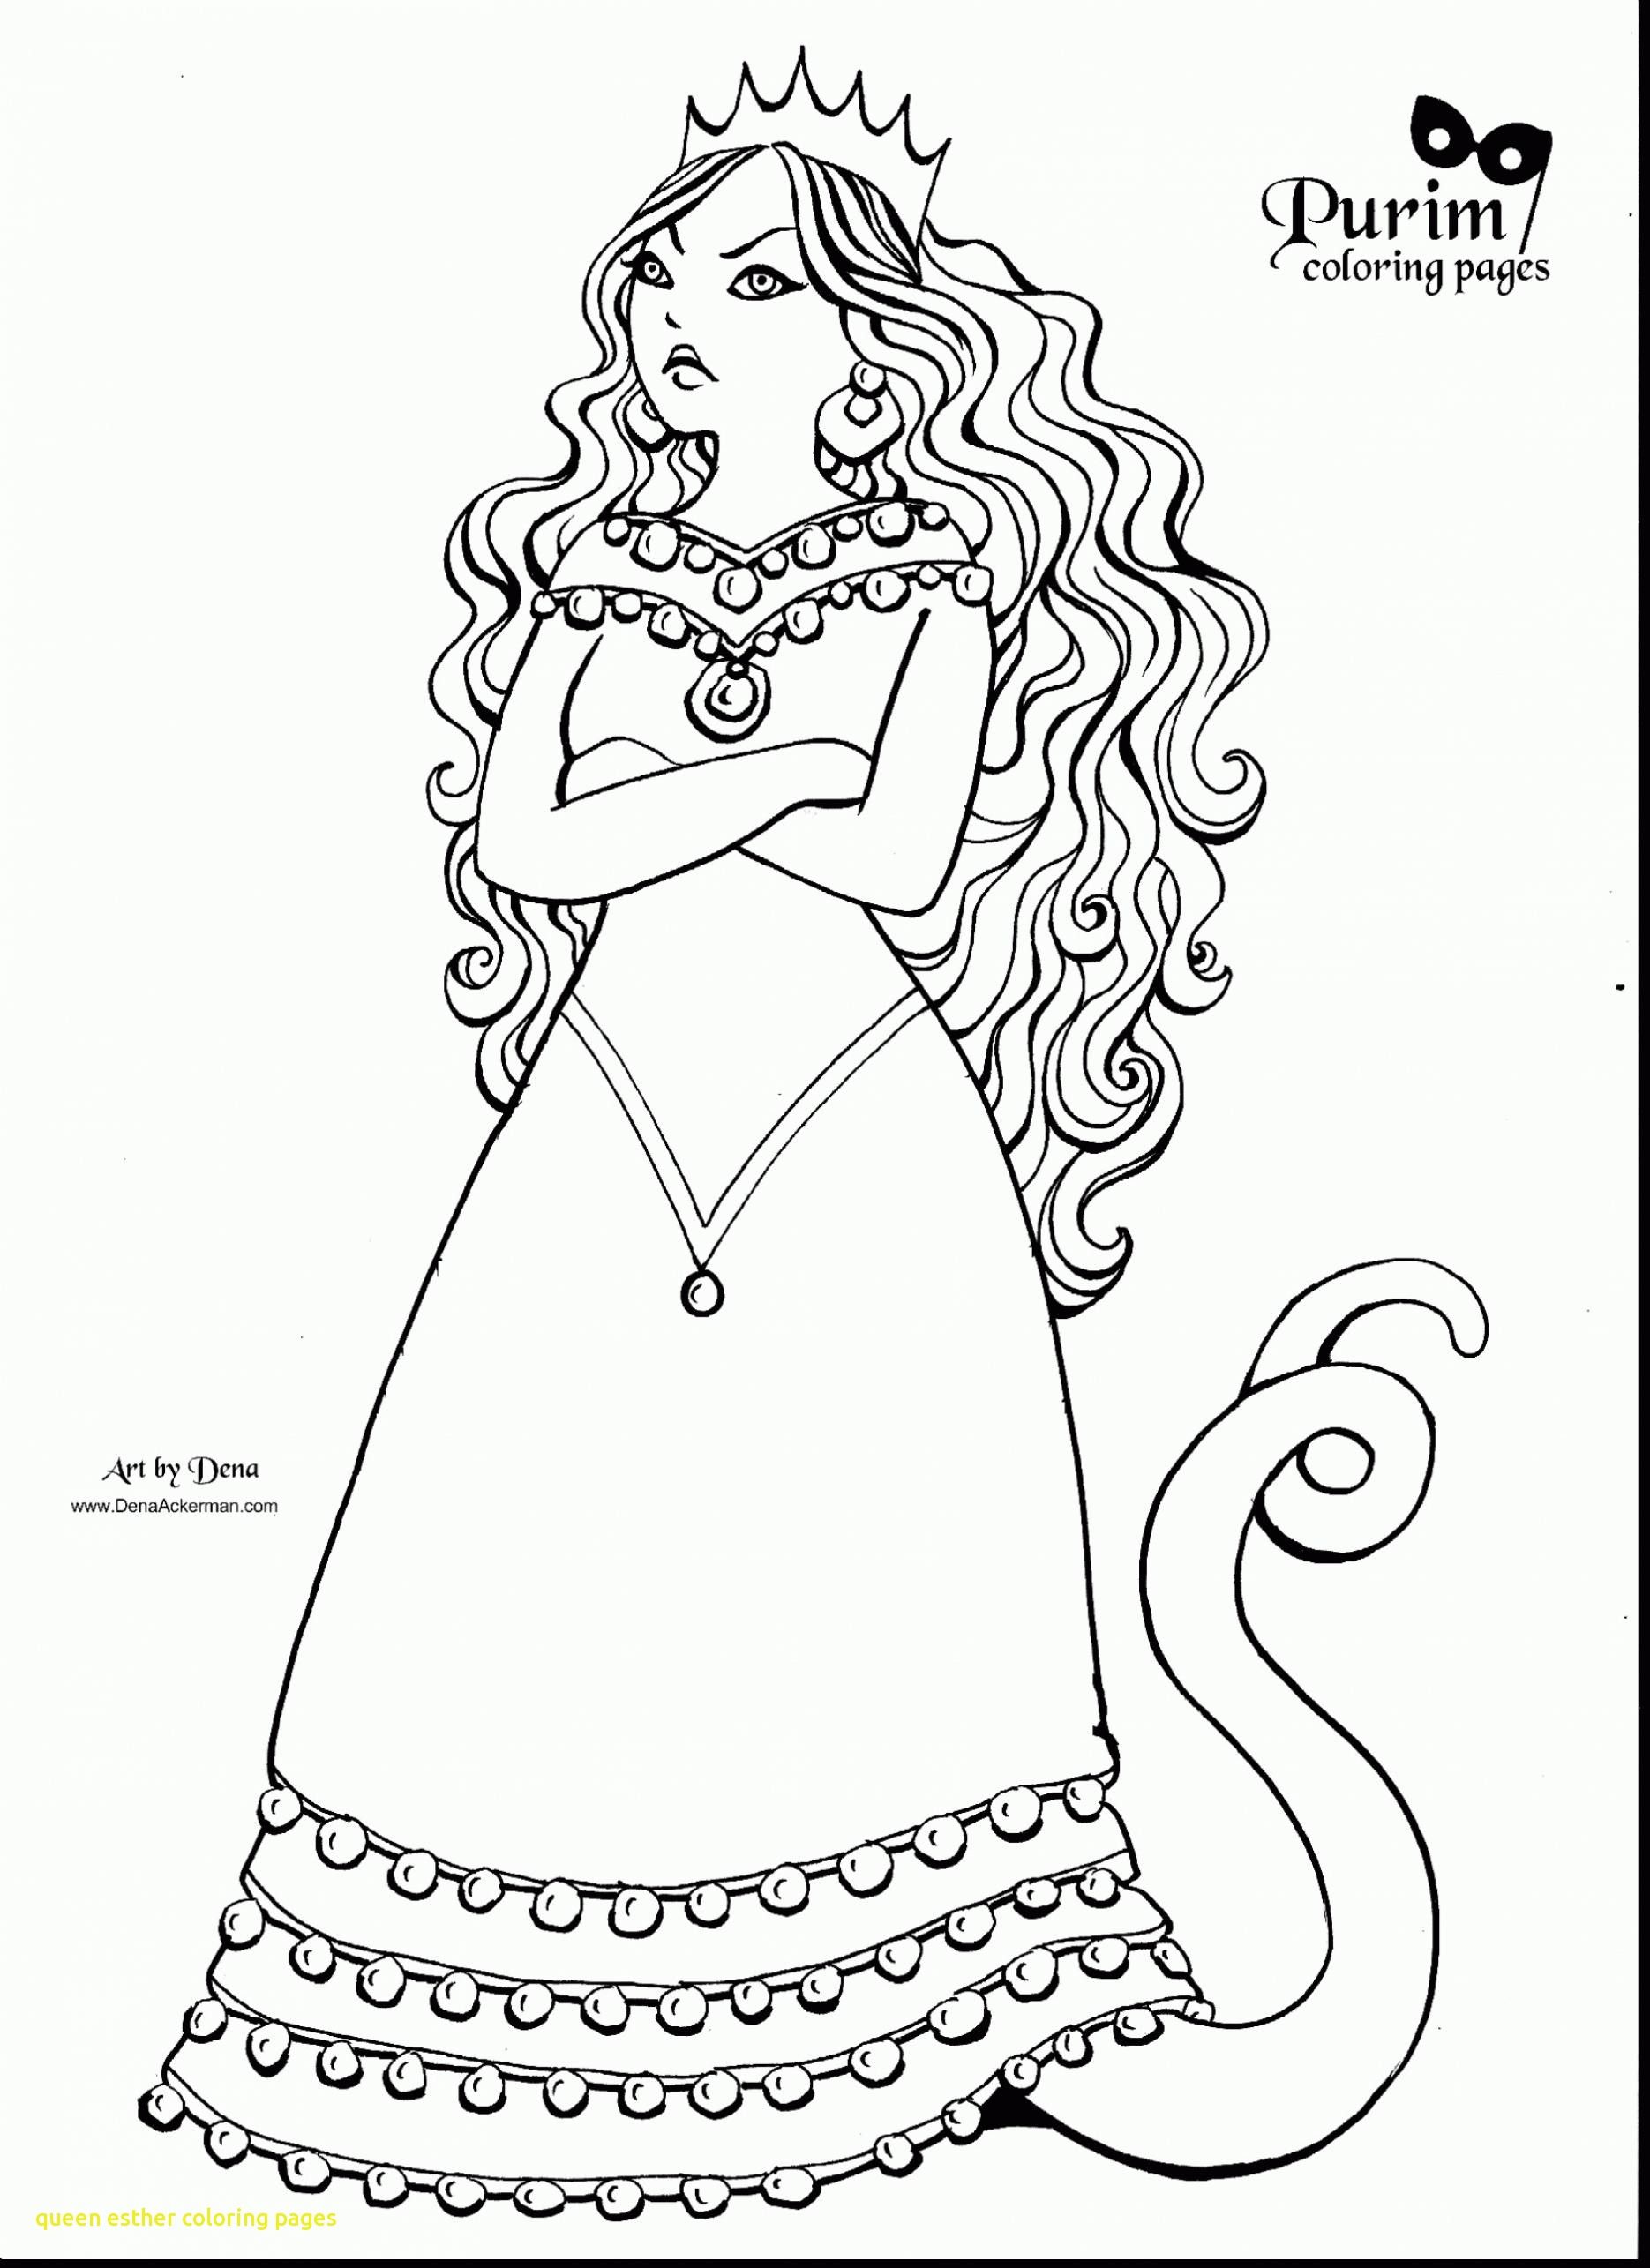 Queen Esther Coloring Pages Printable at GetColorings.com | Free